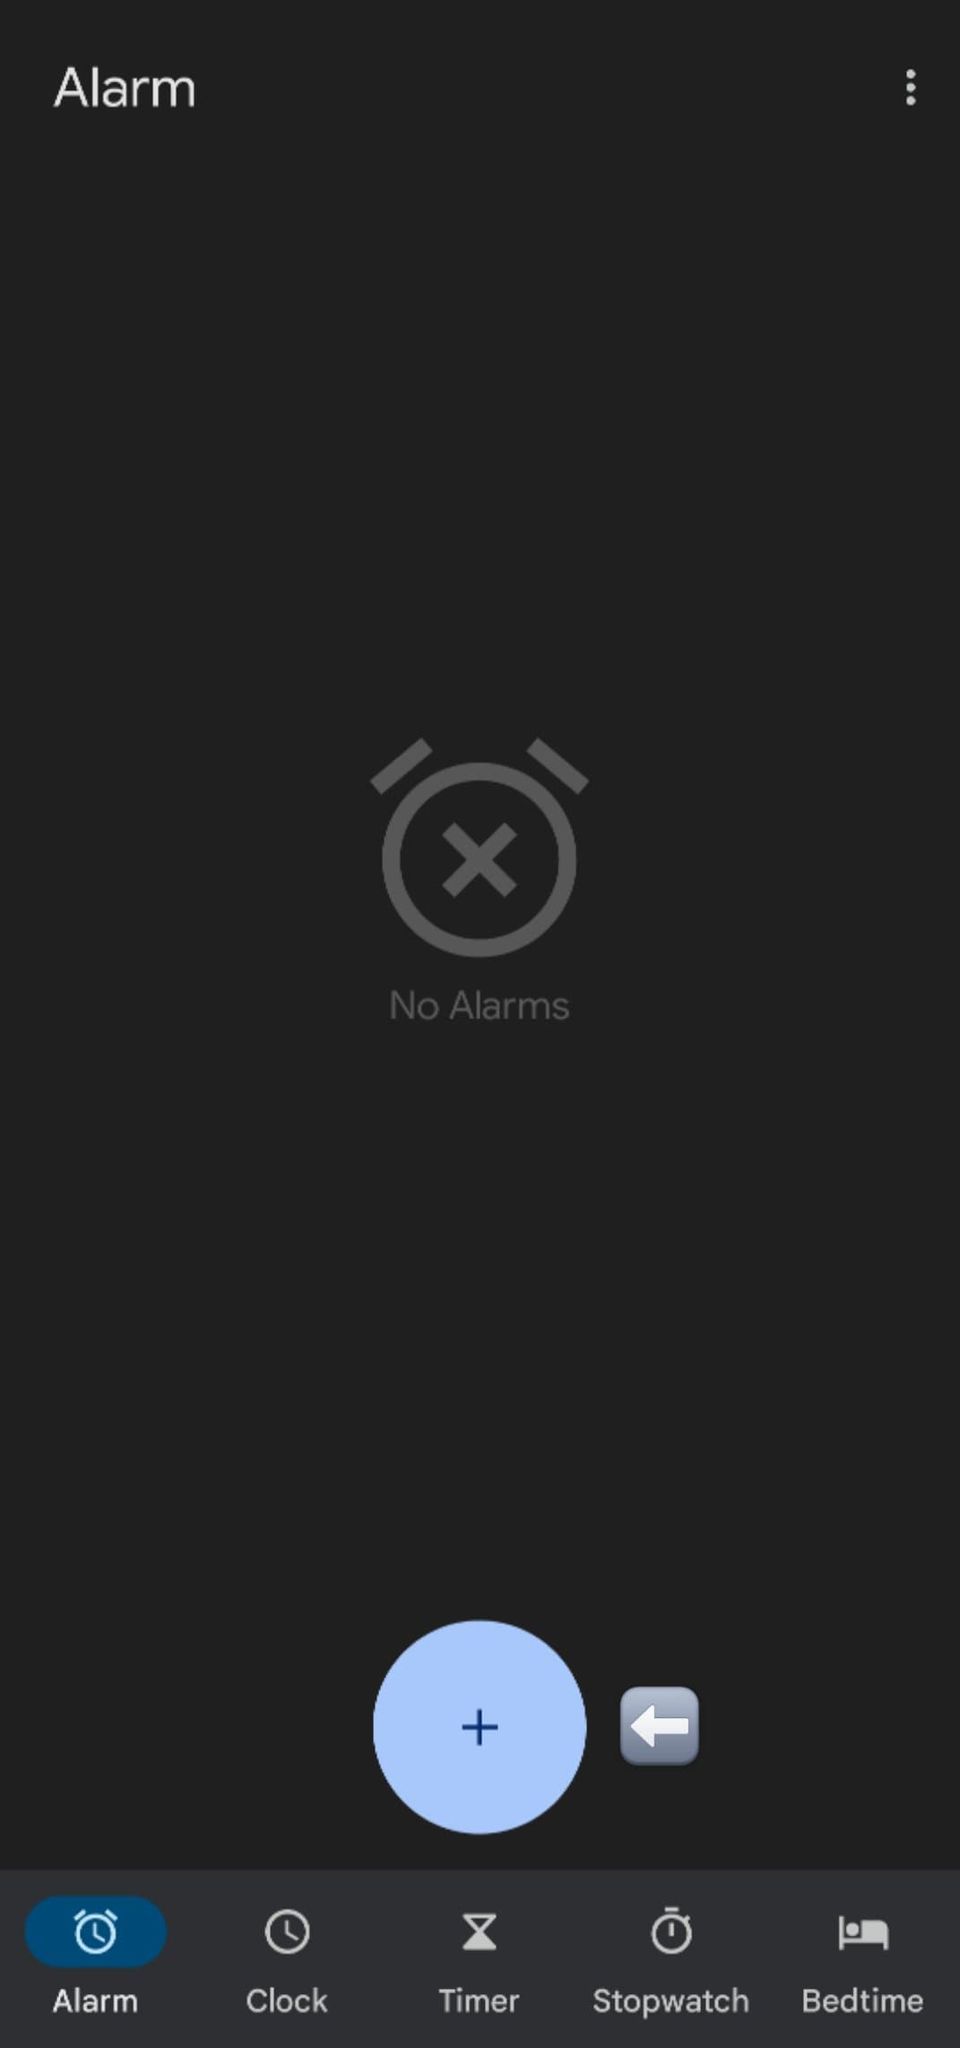 Screenshot of + button for adding alarm in clock.